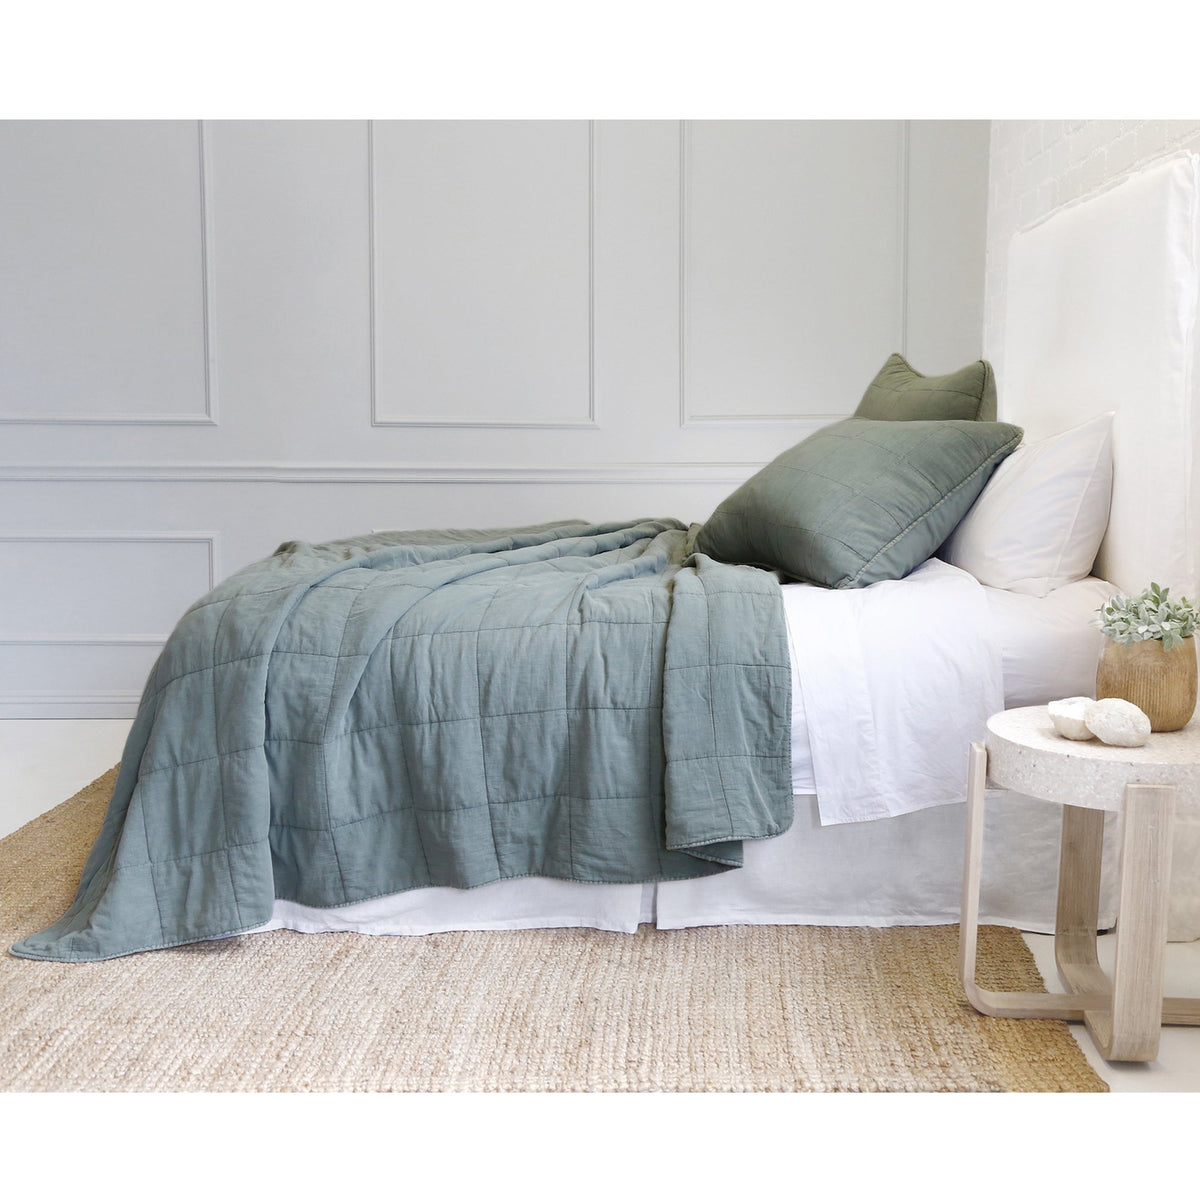 POM POM ANTWERP COVERLET COLLECTION - MOSS